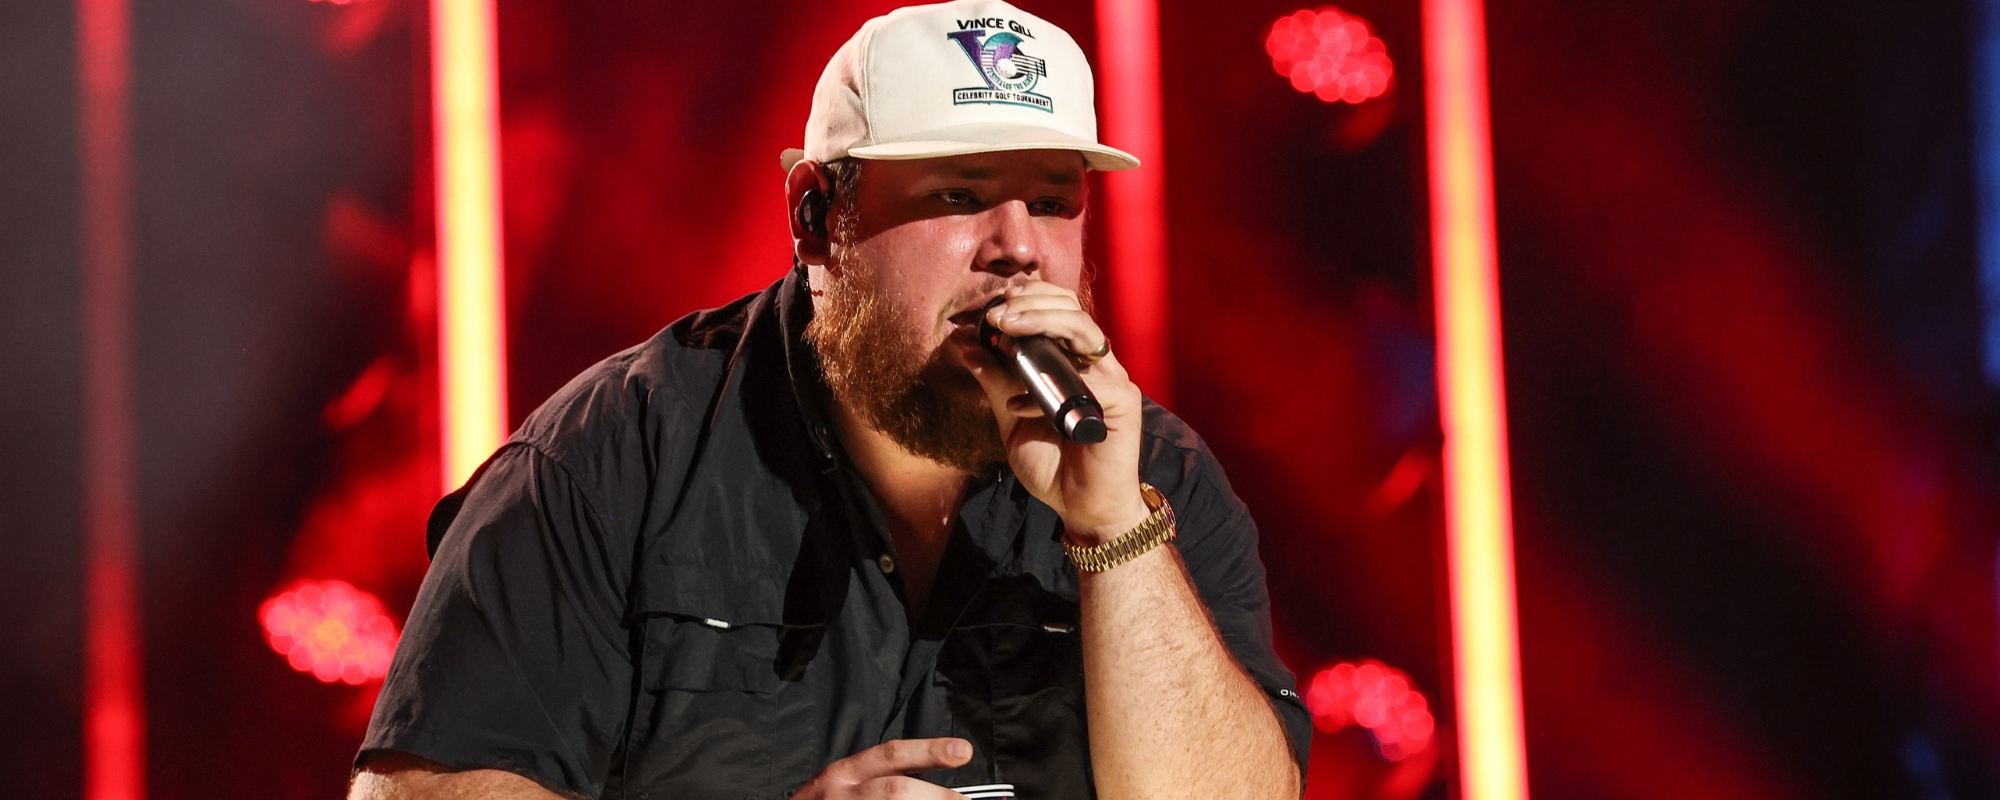 Kept His Word: Luke Combs Launches Tumbler Sale to Help Woman He Unknowingly Sued for $250,000